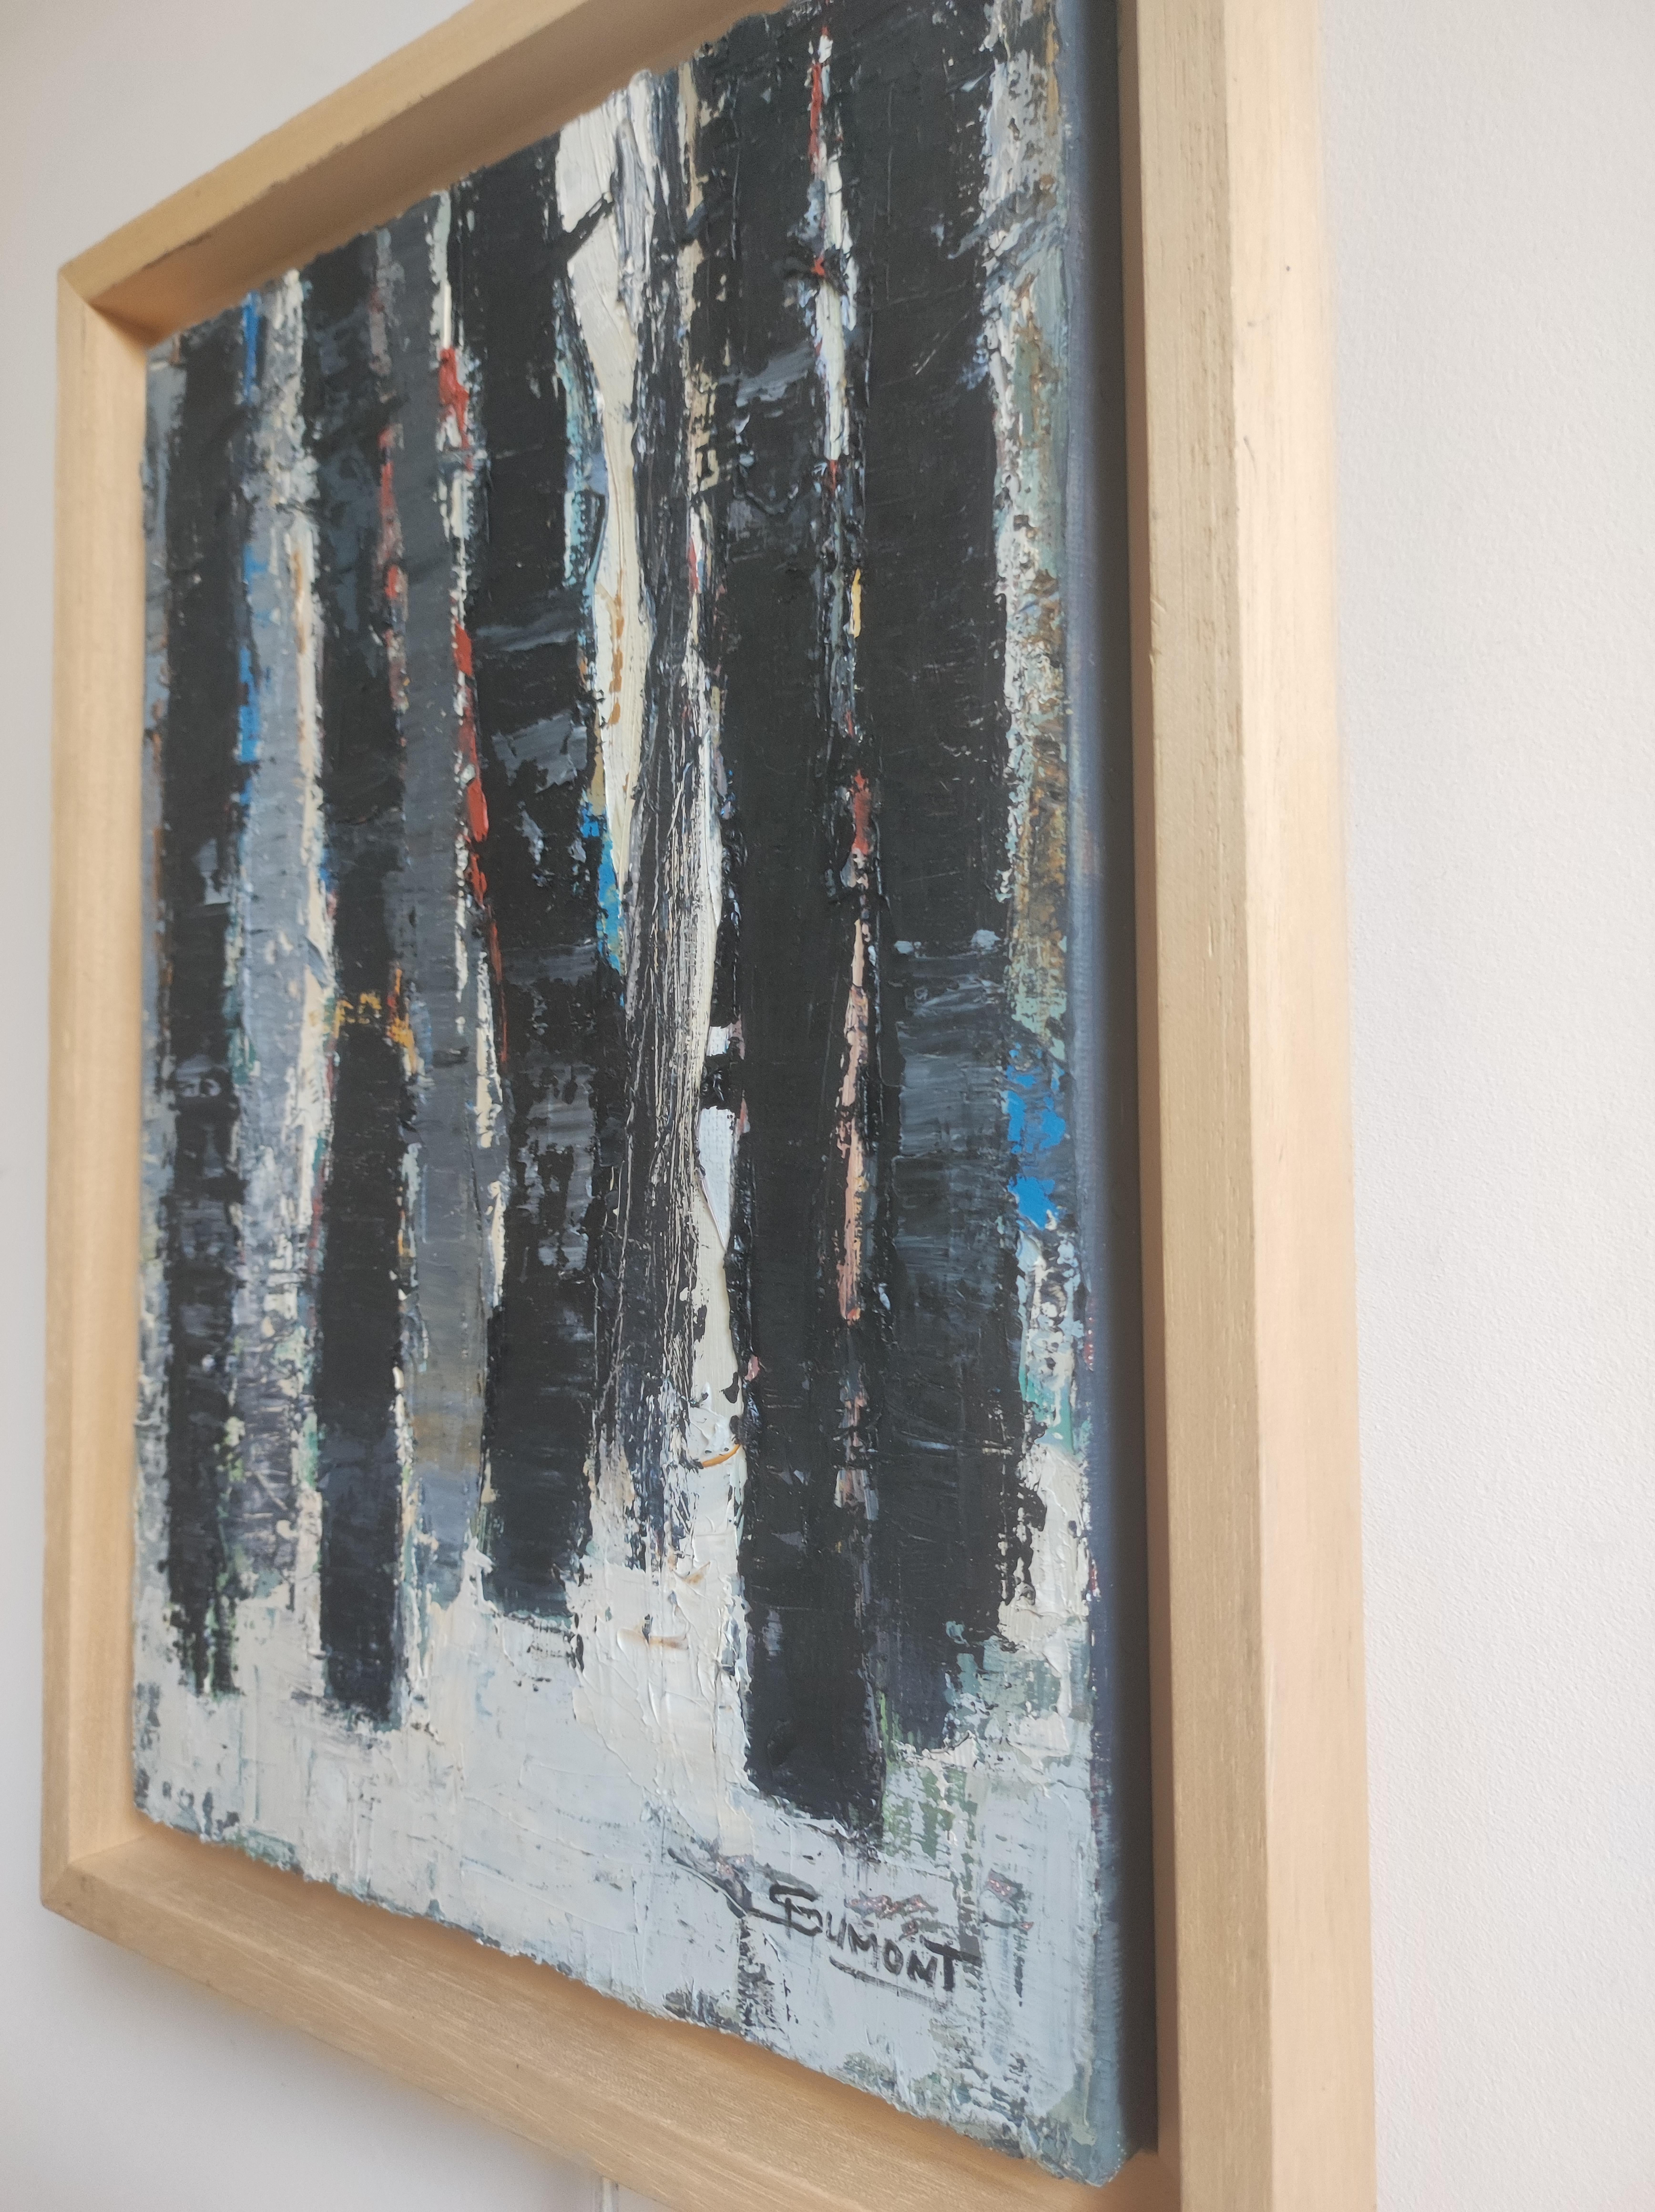 Sophie Dumont is always at the limit of abstraction and figurative, this painting is the representation.
The background is worked with different whites that highlight the trees.
Abstract painting of black trees in a dark forest. Oil on linen canvas